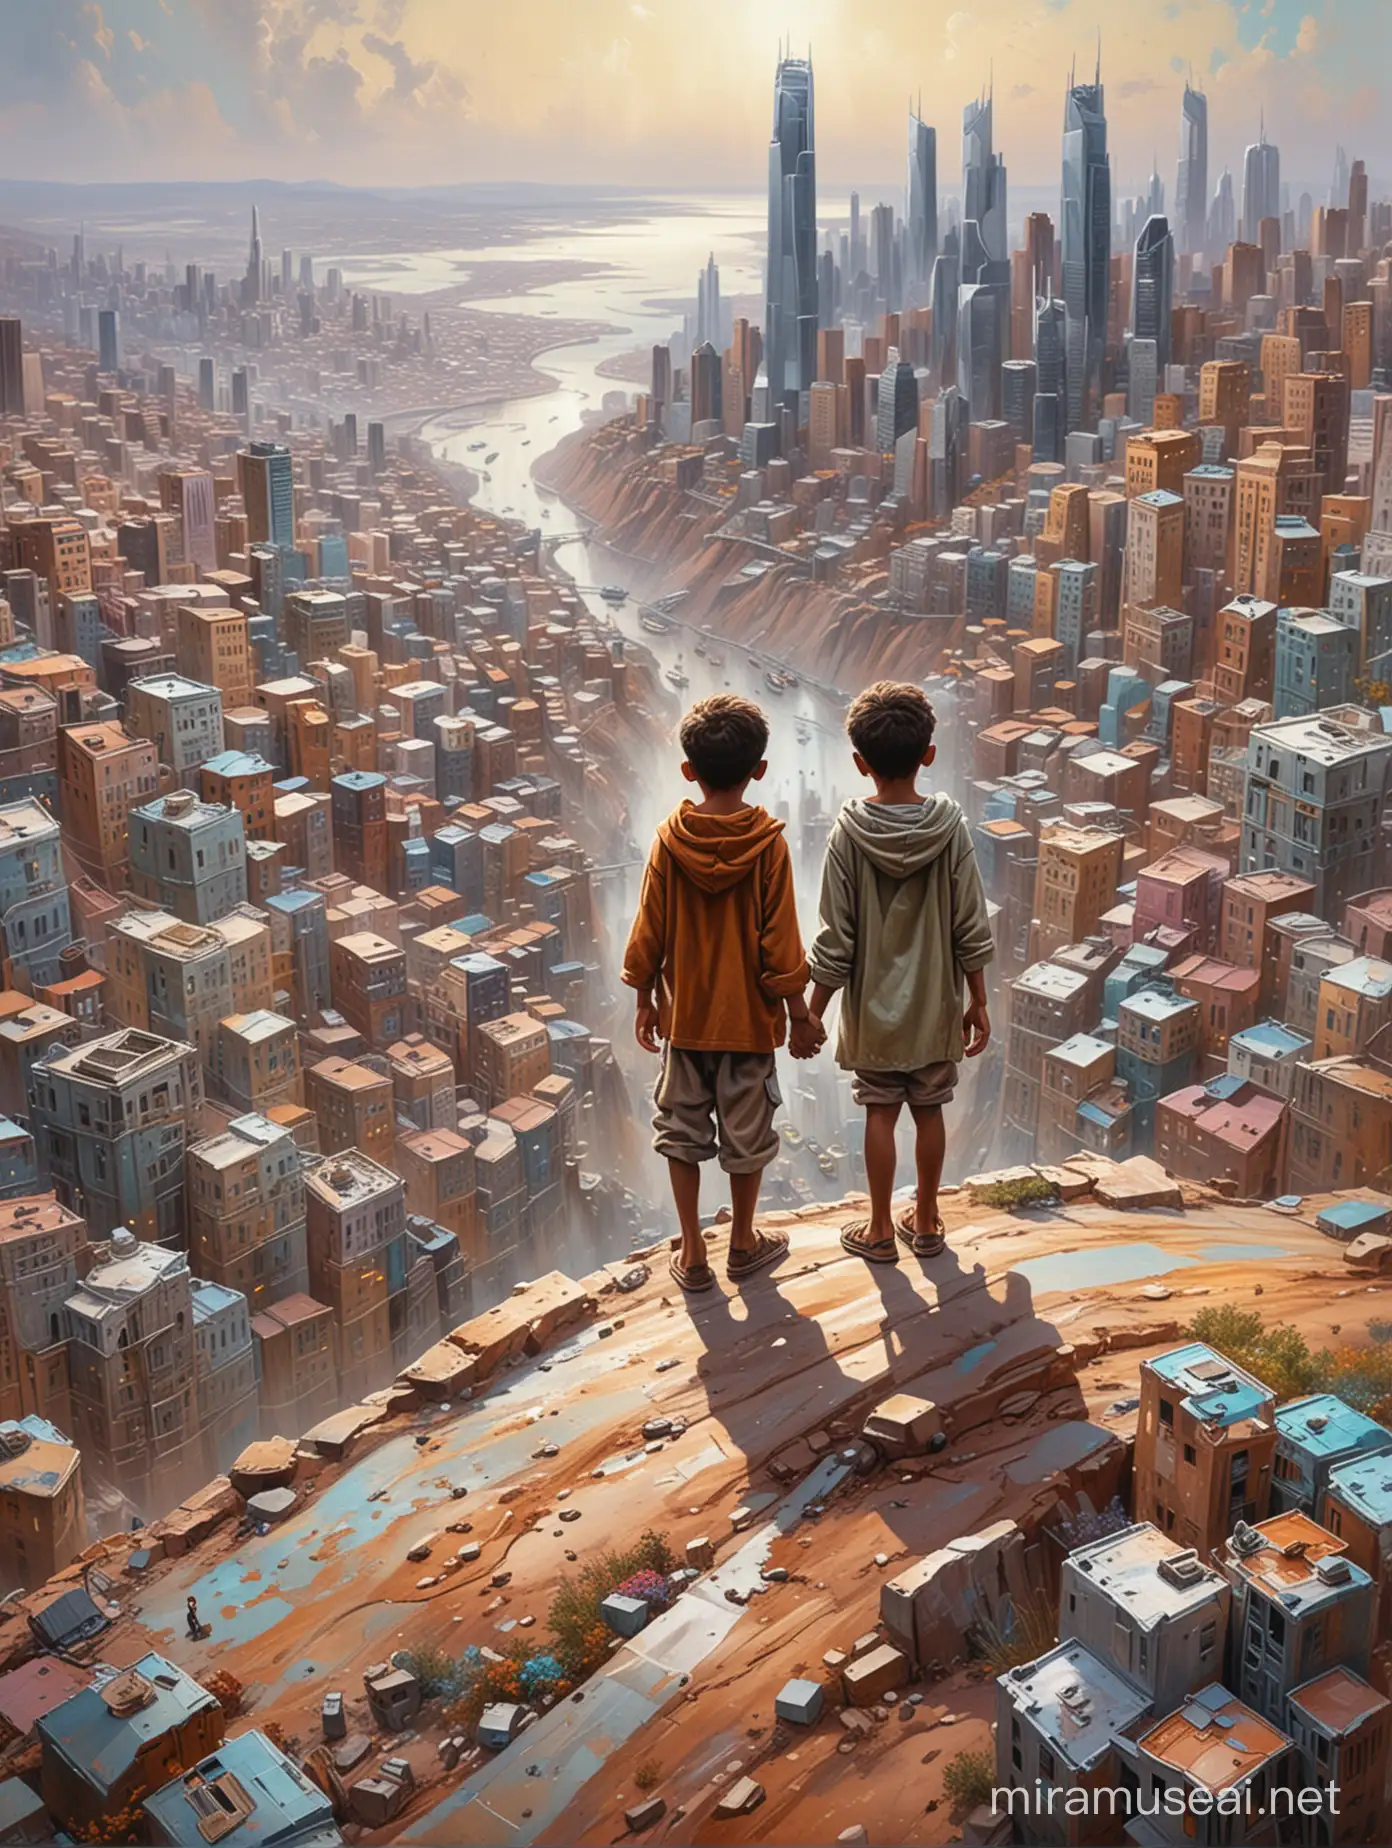 Futuristic Cityscape from Above with Brown Children in Rags